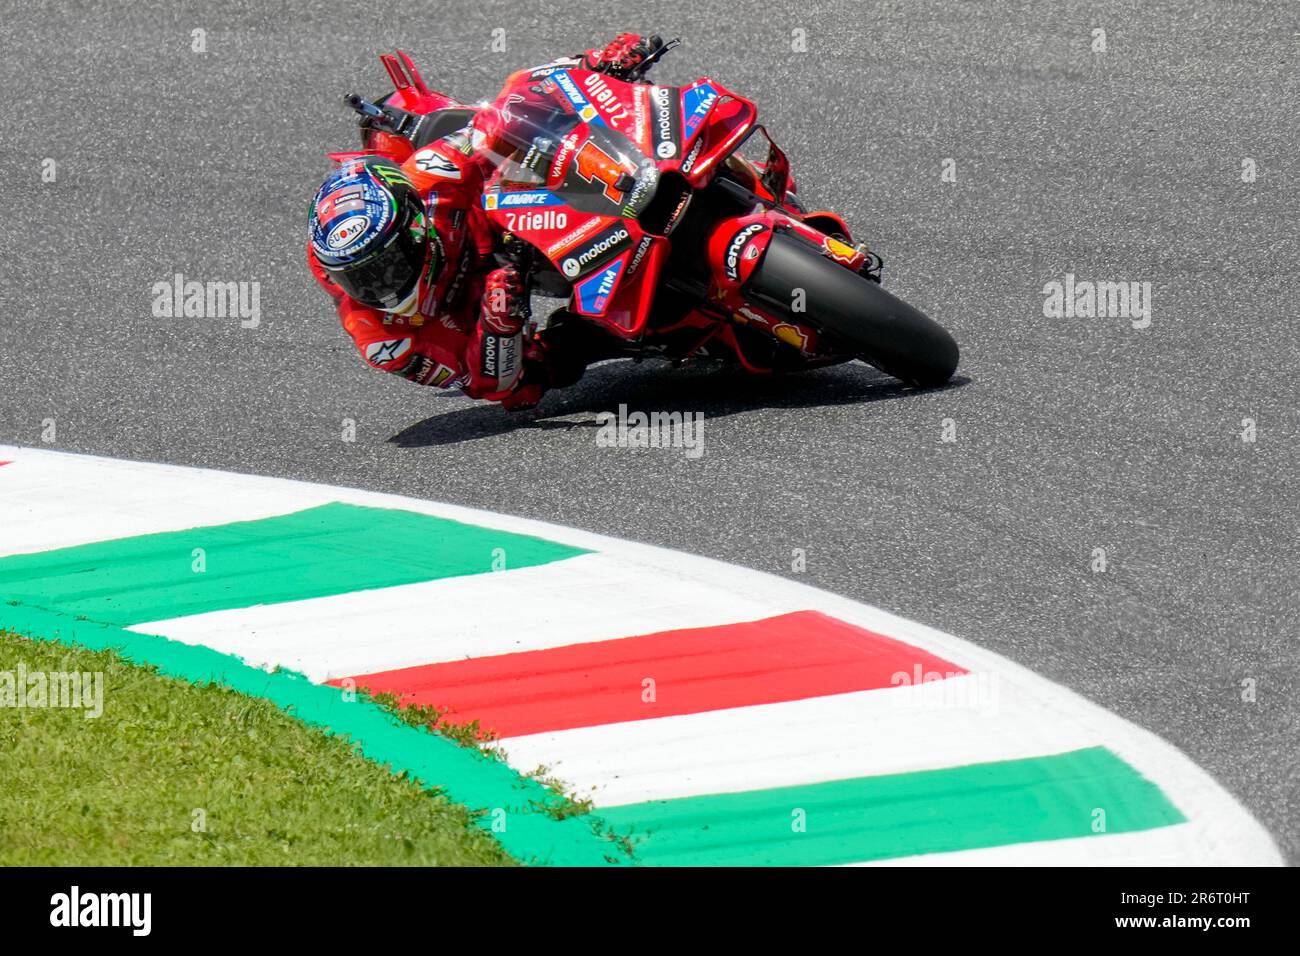 MotoGP: Ducati Lenovo Team Officially Introduced In Italy